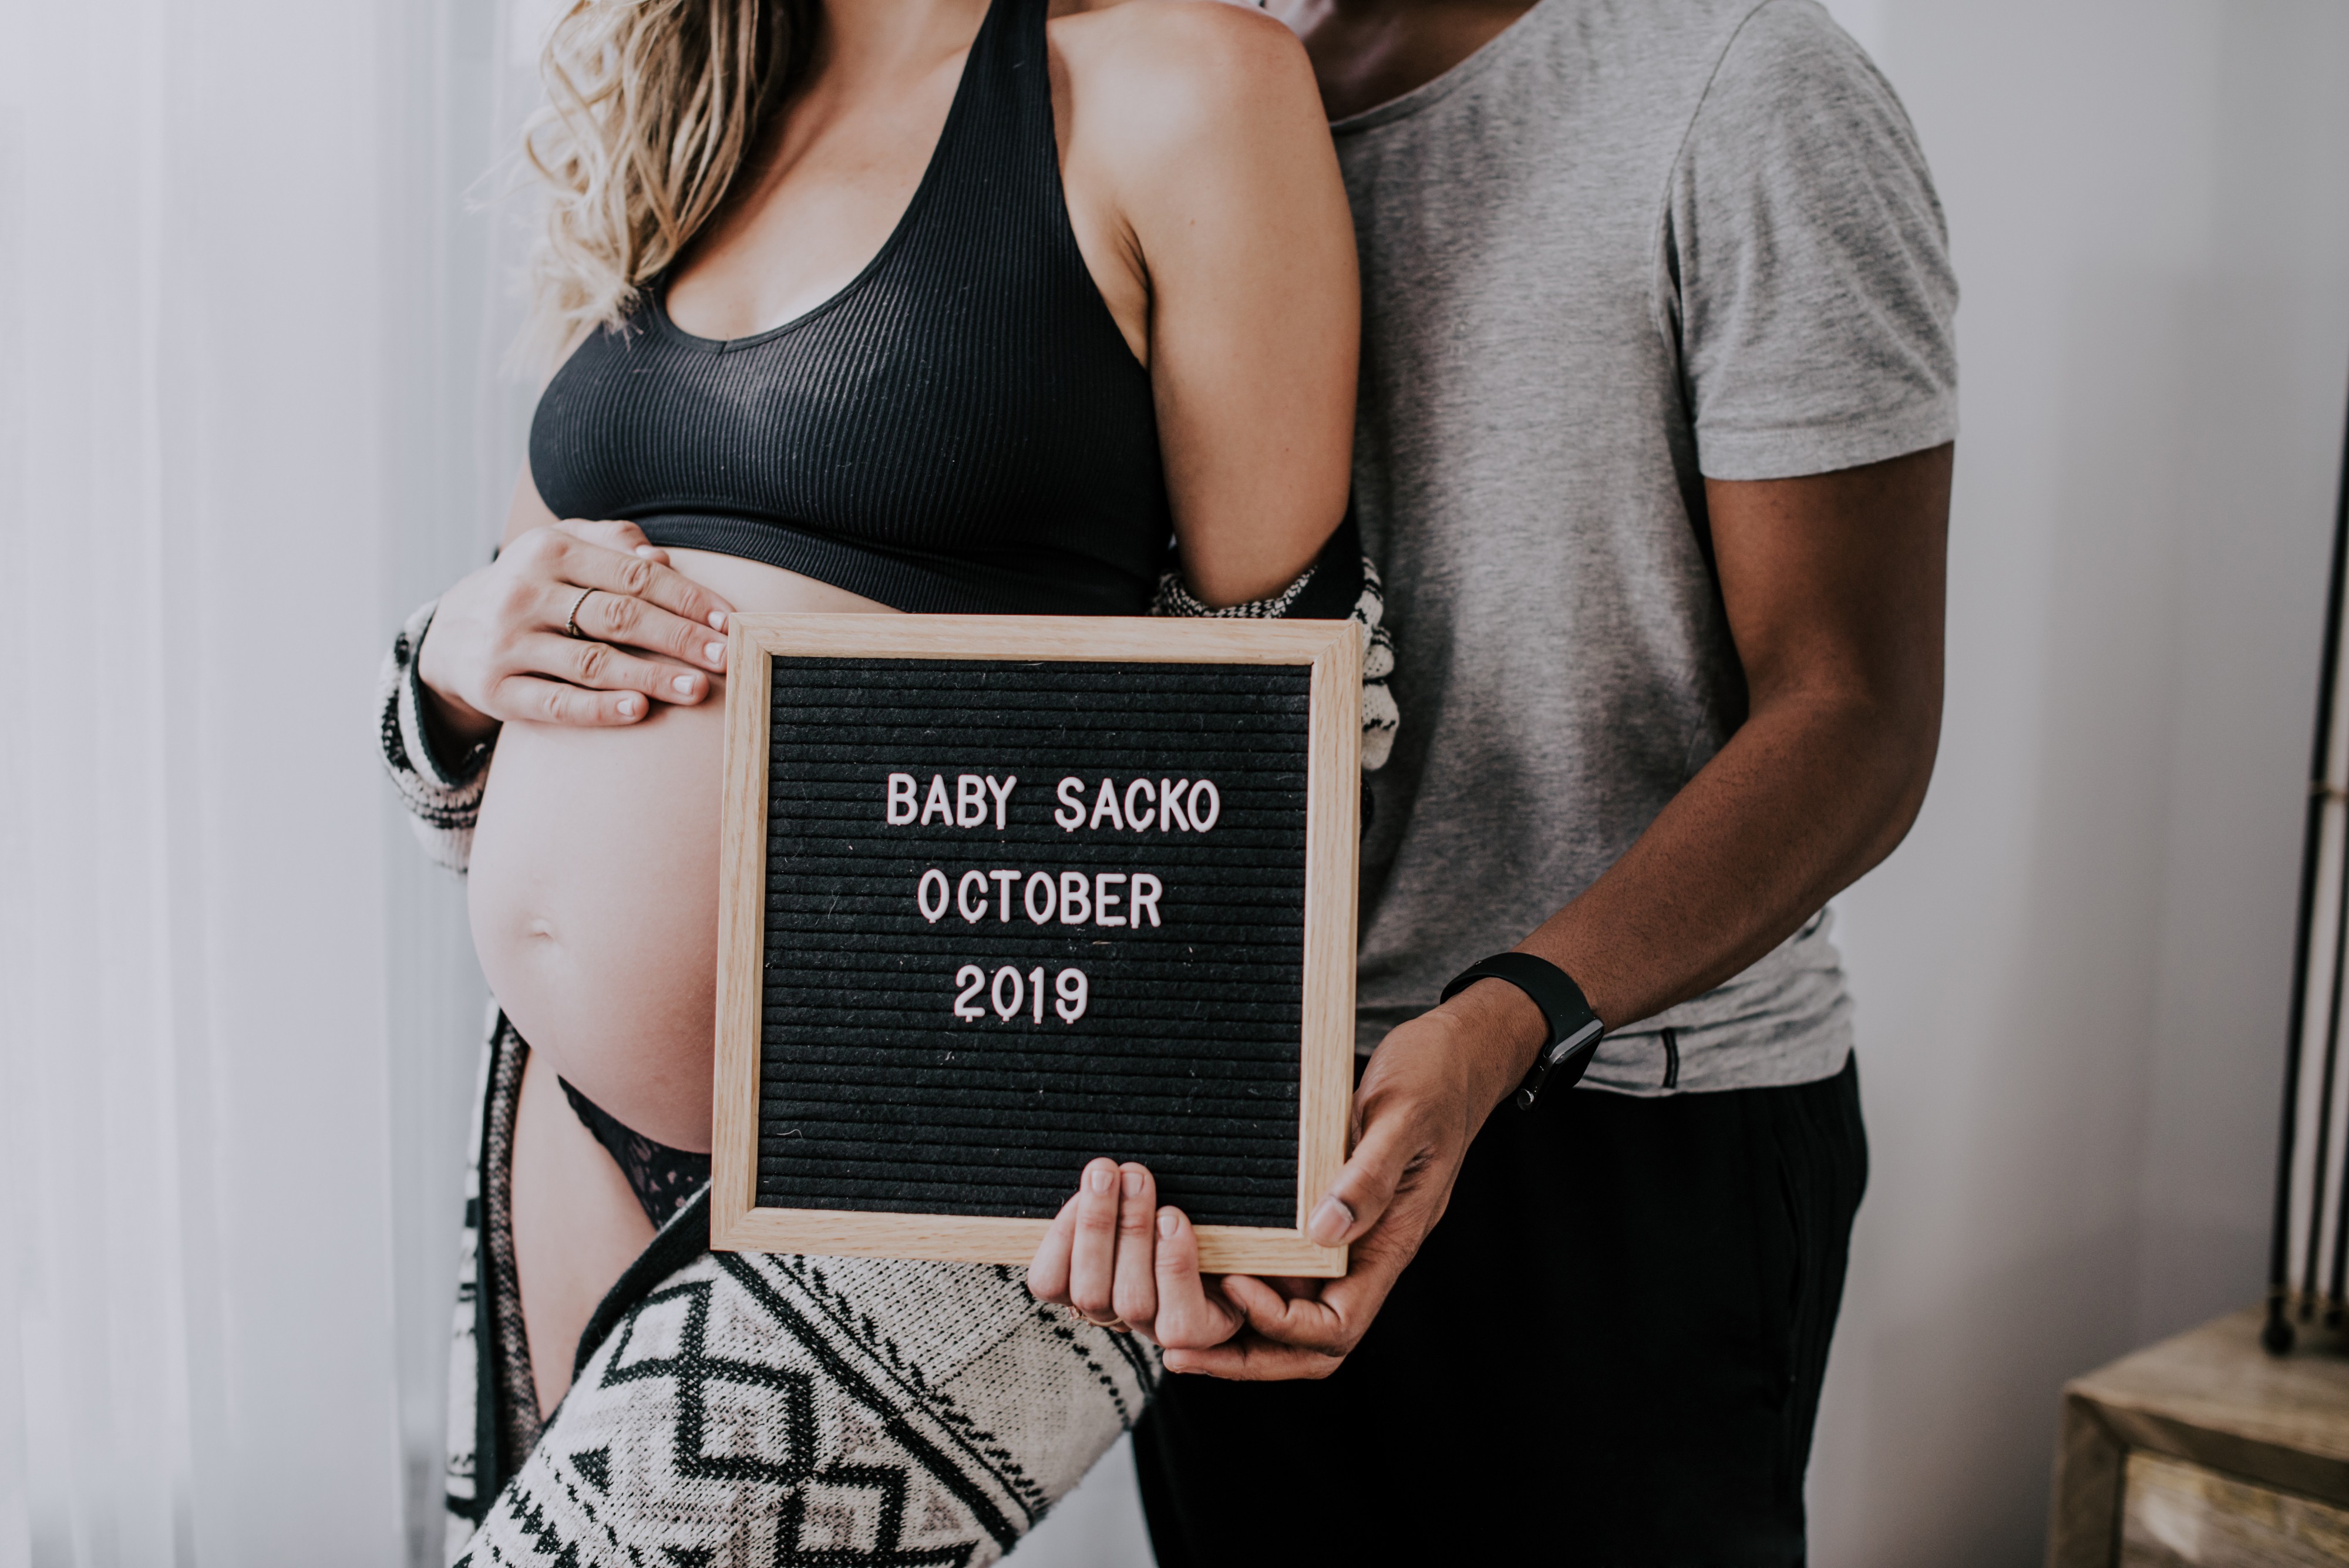 maternity photo of woman's belly and partner embracing her from behind